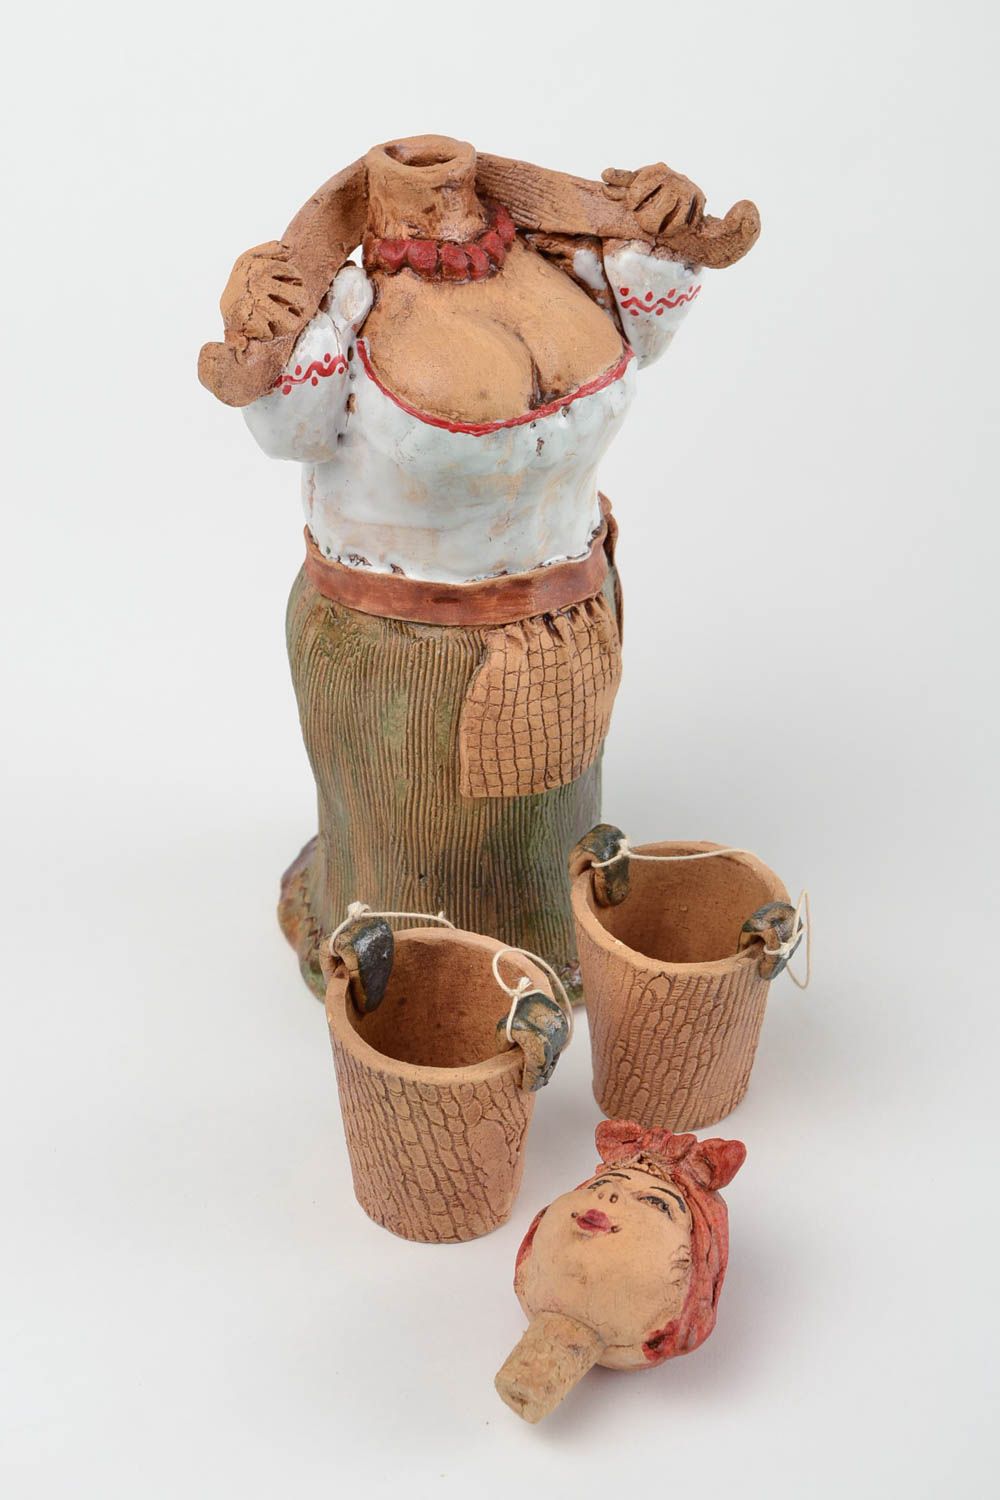 Handmade village woman's statuette with two jars for spices 1,7 lb photo 5